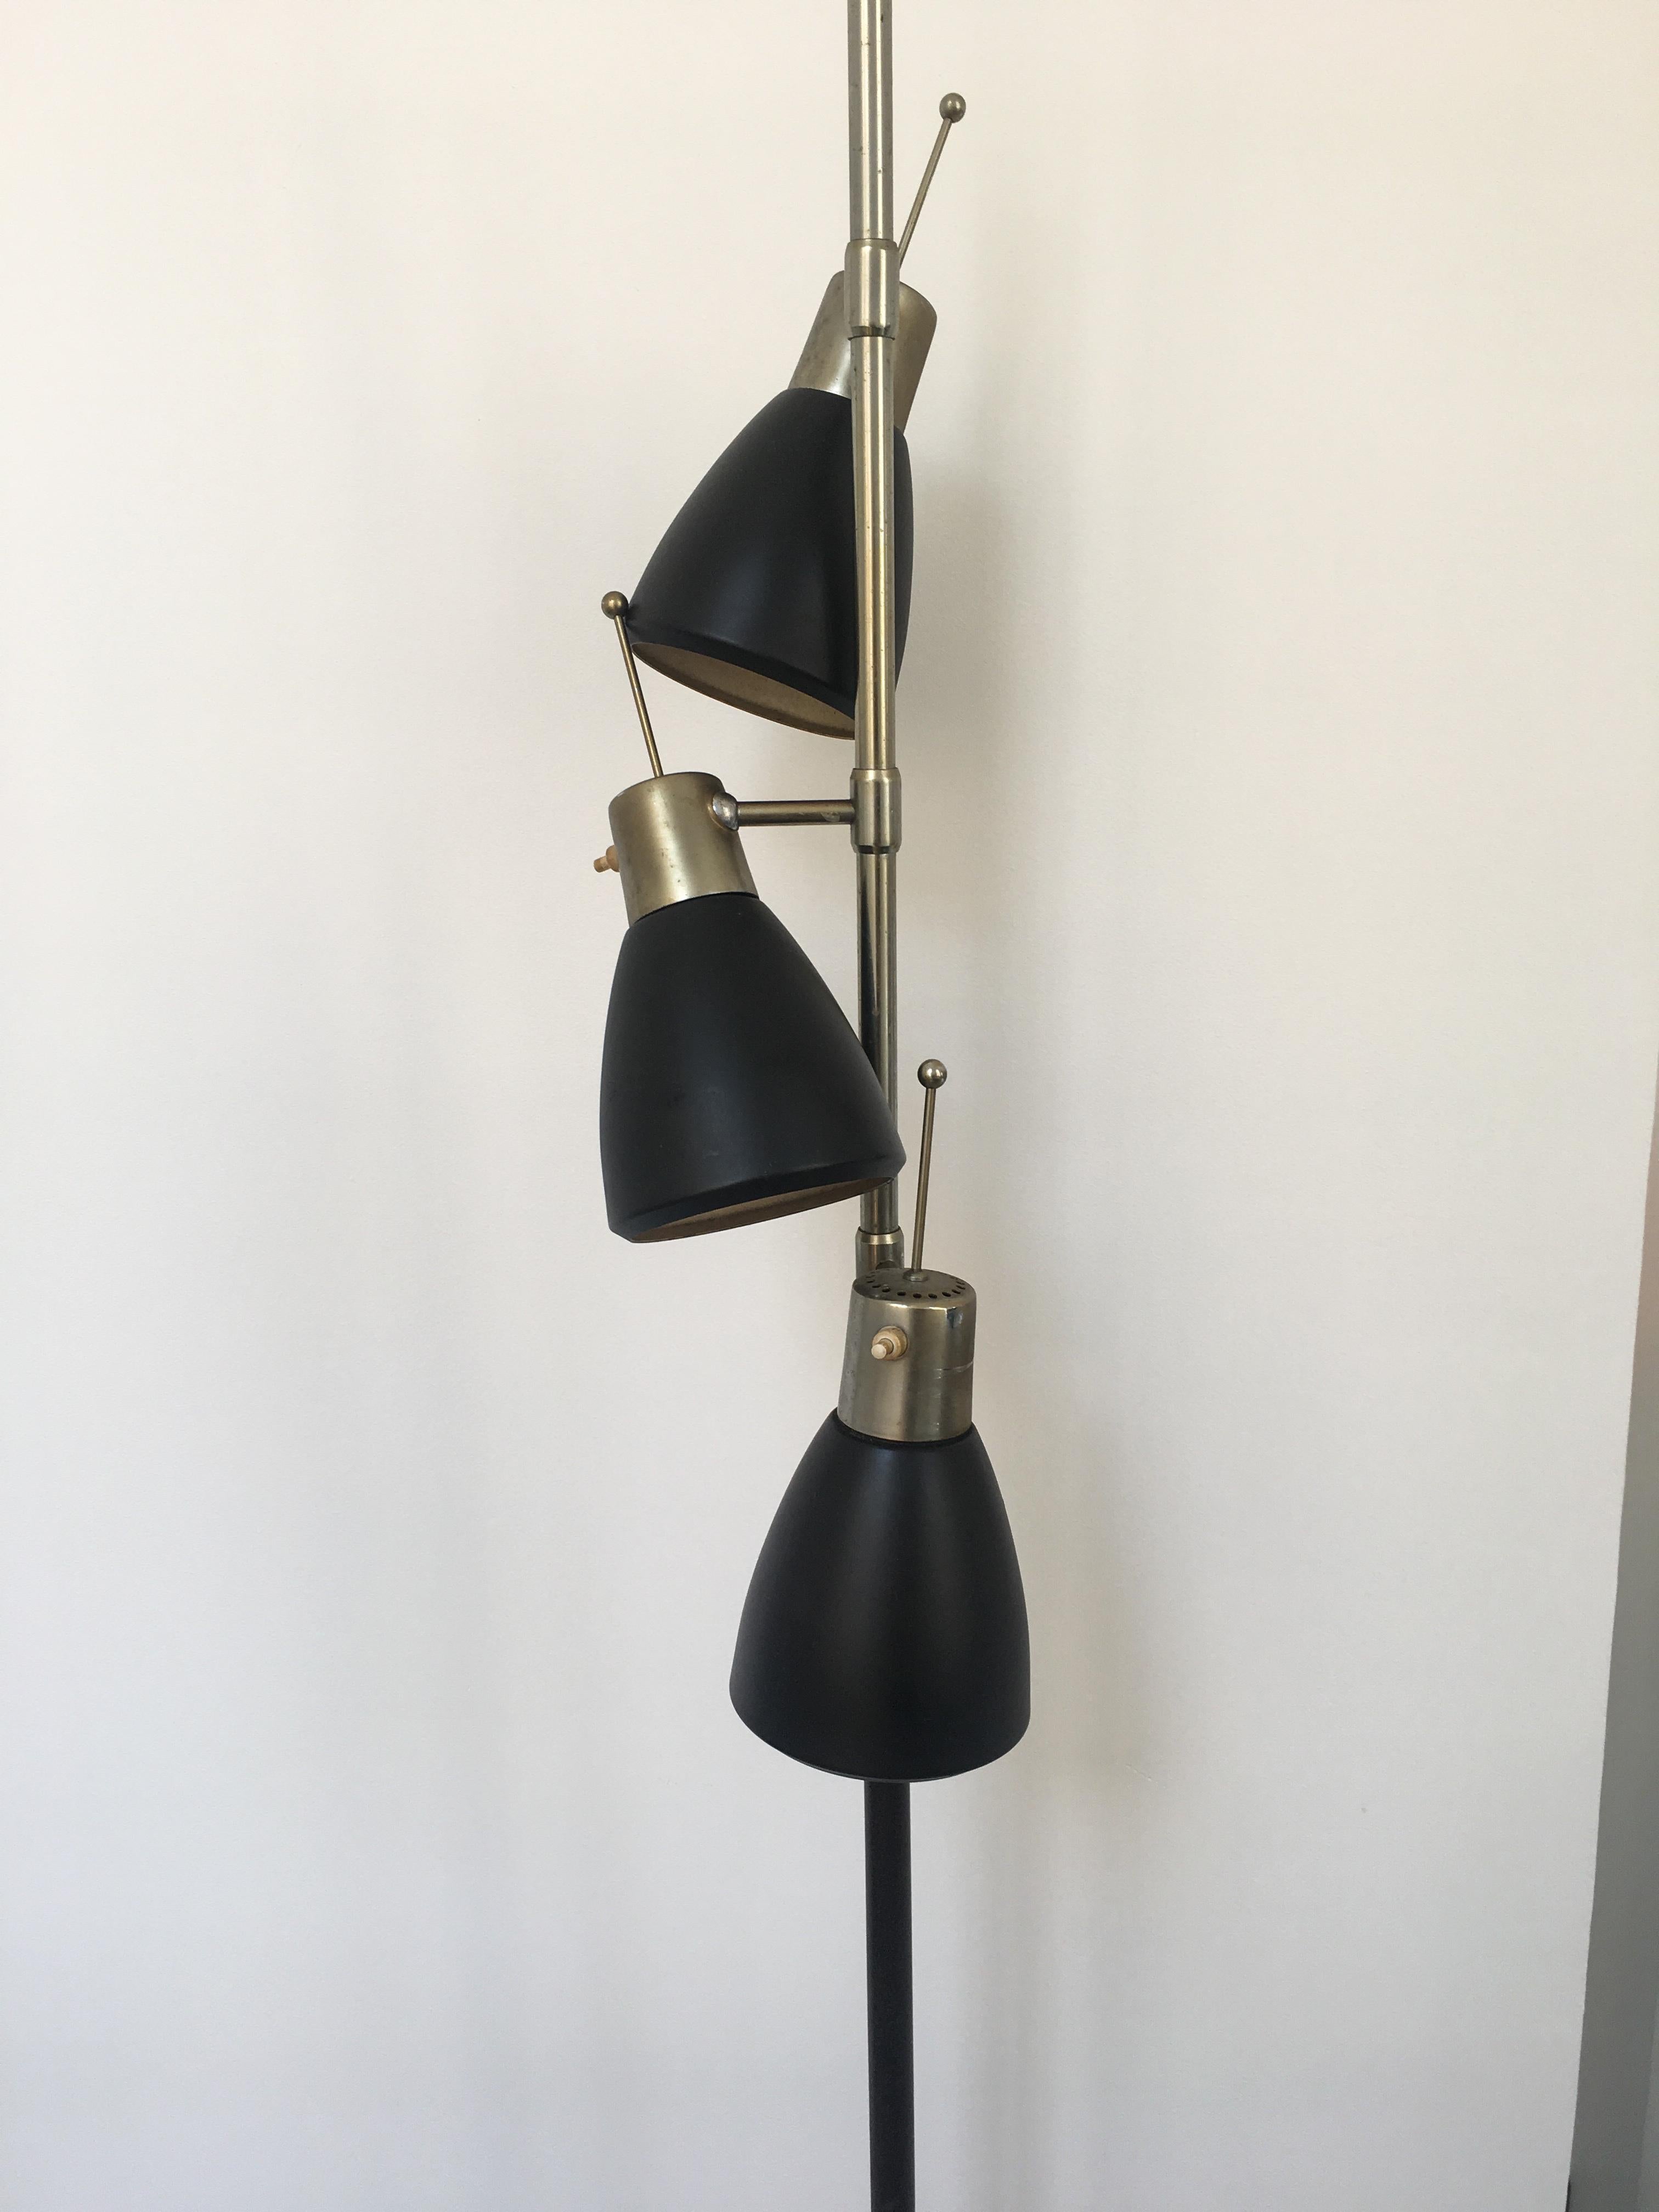 Rare Monix floor lamp 3 adjustable and orientable spots on a metal barrel nickeled and lacquered black, foot circular base. Each spot has its own switch to be adjusted and can be used as a reading lamp.



   